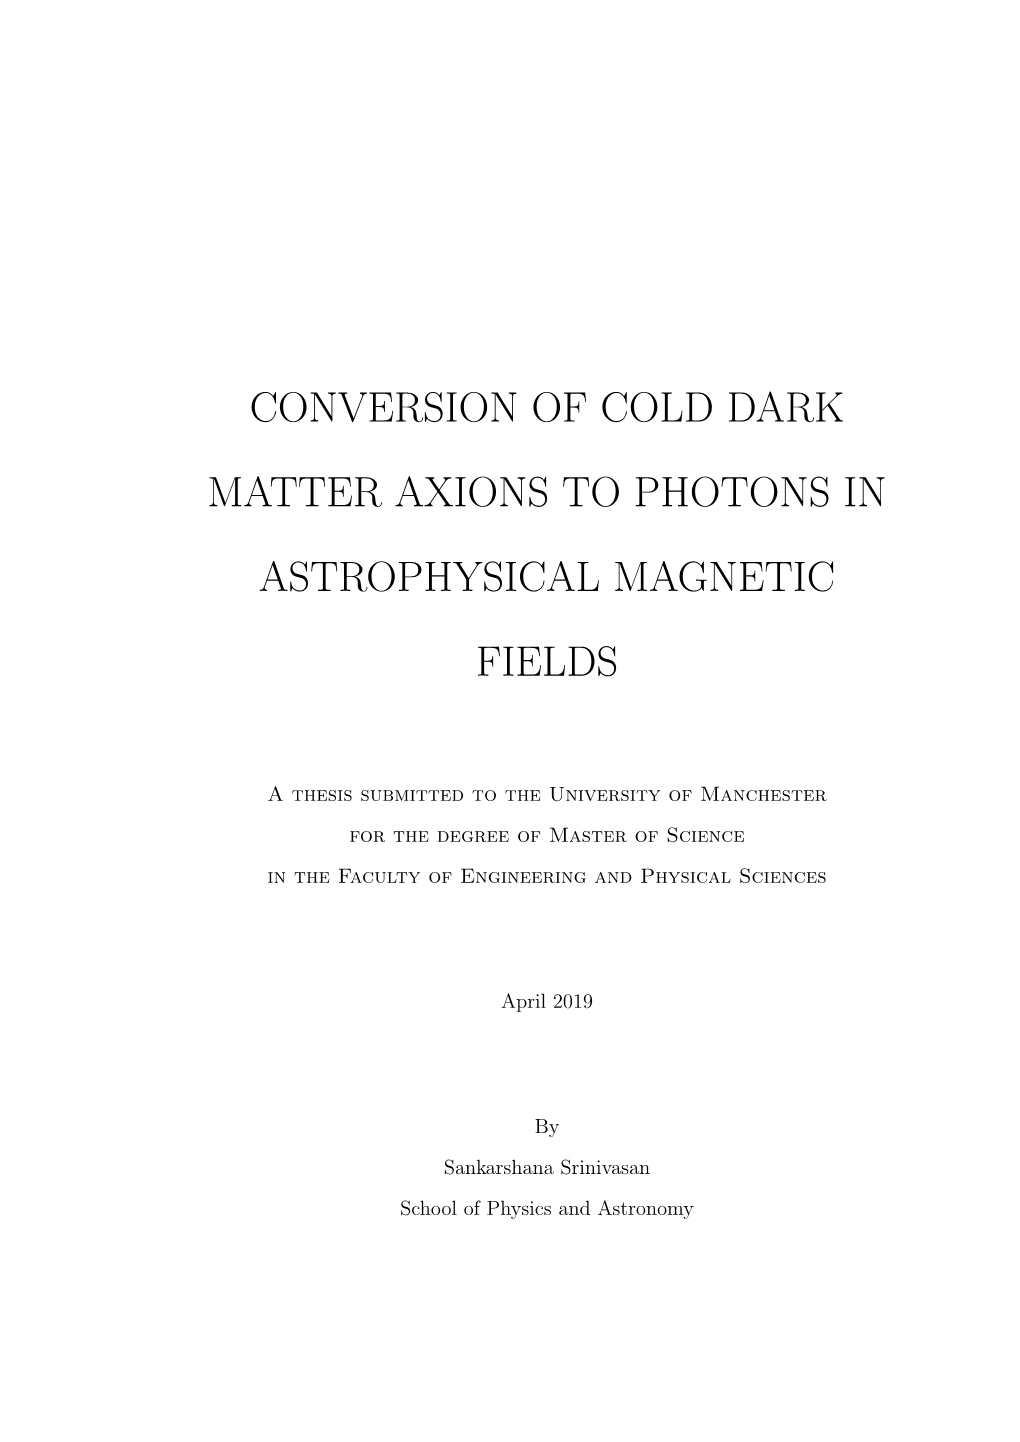 Conversion of Cold Dark Matter Axions to Photons in Astrophysical Magnetic Fields